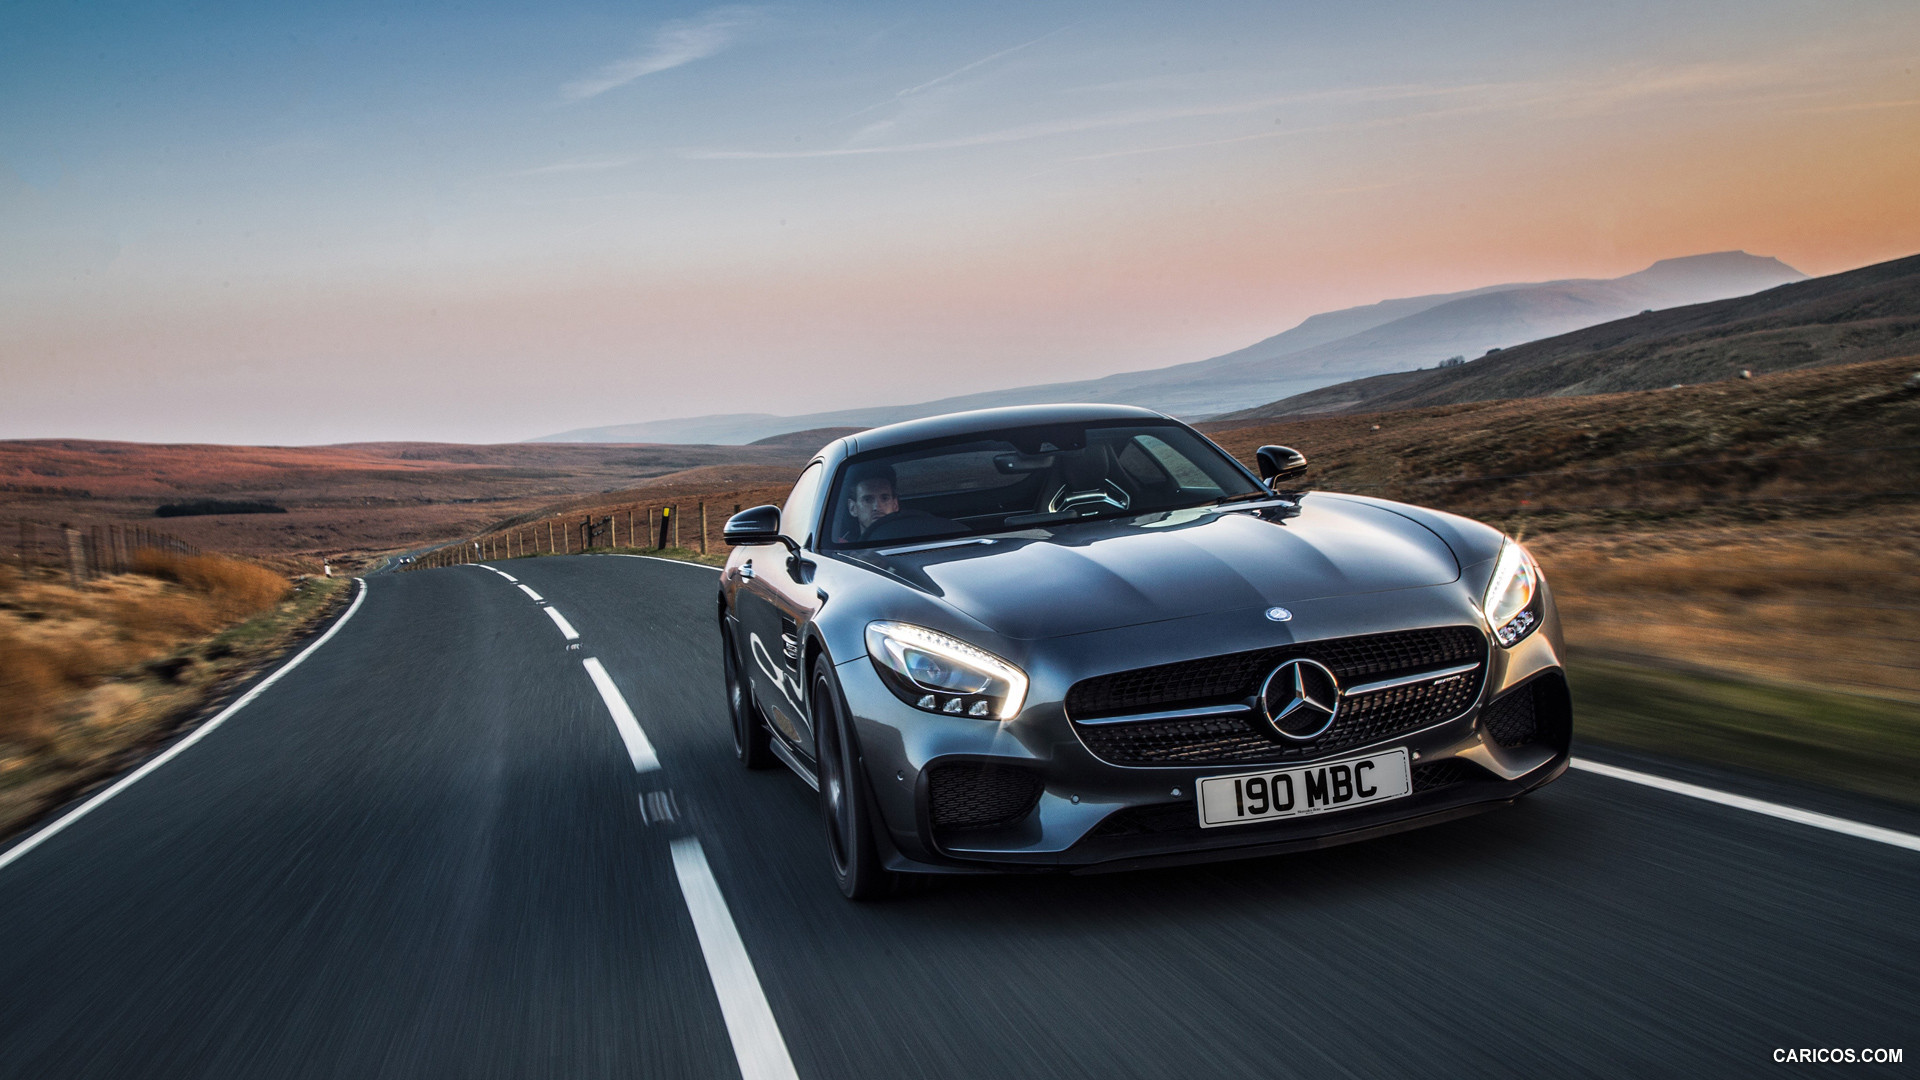 2016 Mercedes AMG GT S Edition 1 UK Spec   Front Caricos